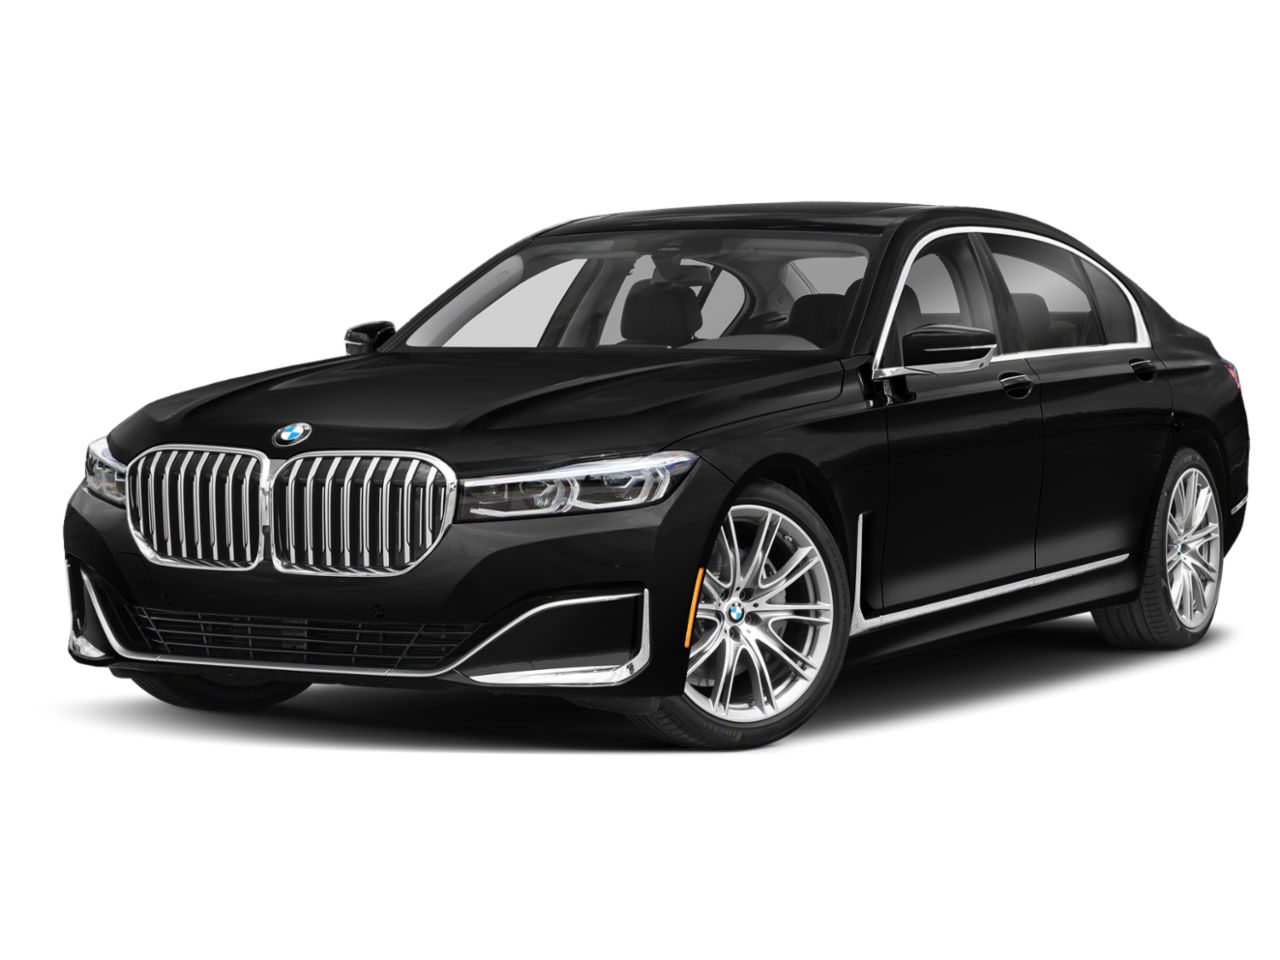 New 2022 BMW 740i Details from Garlyn Shelton Auto Group's ...